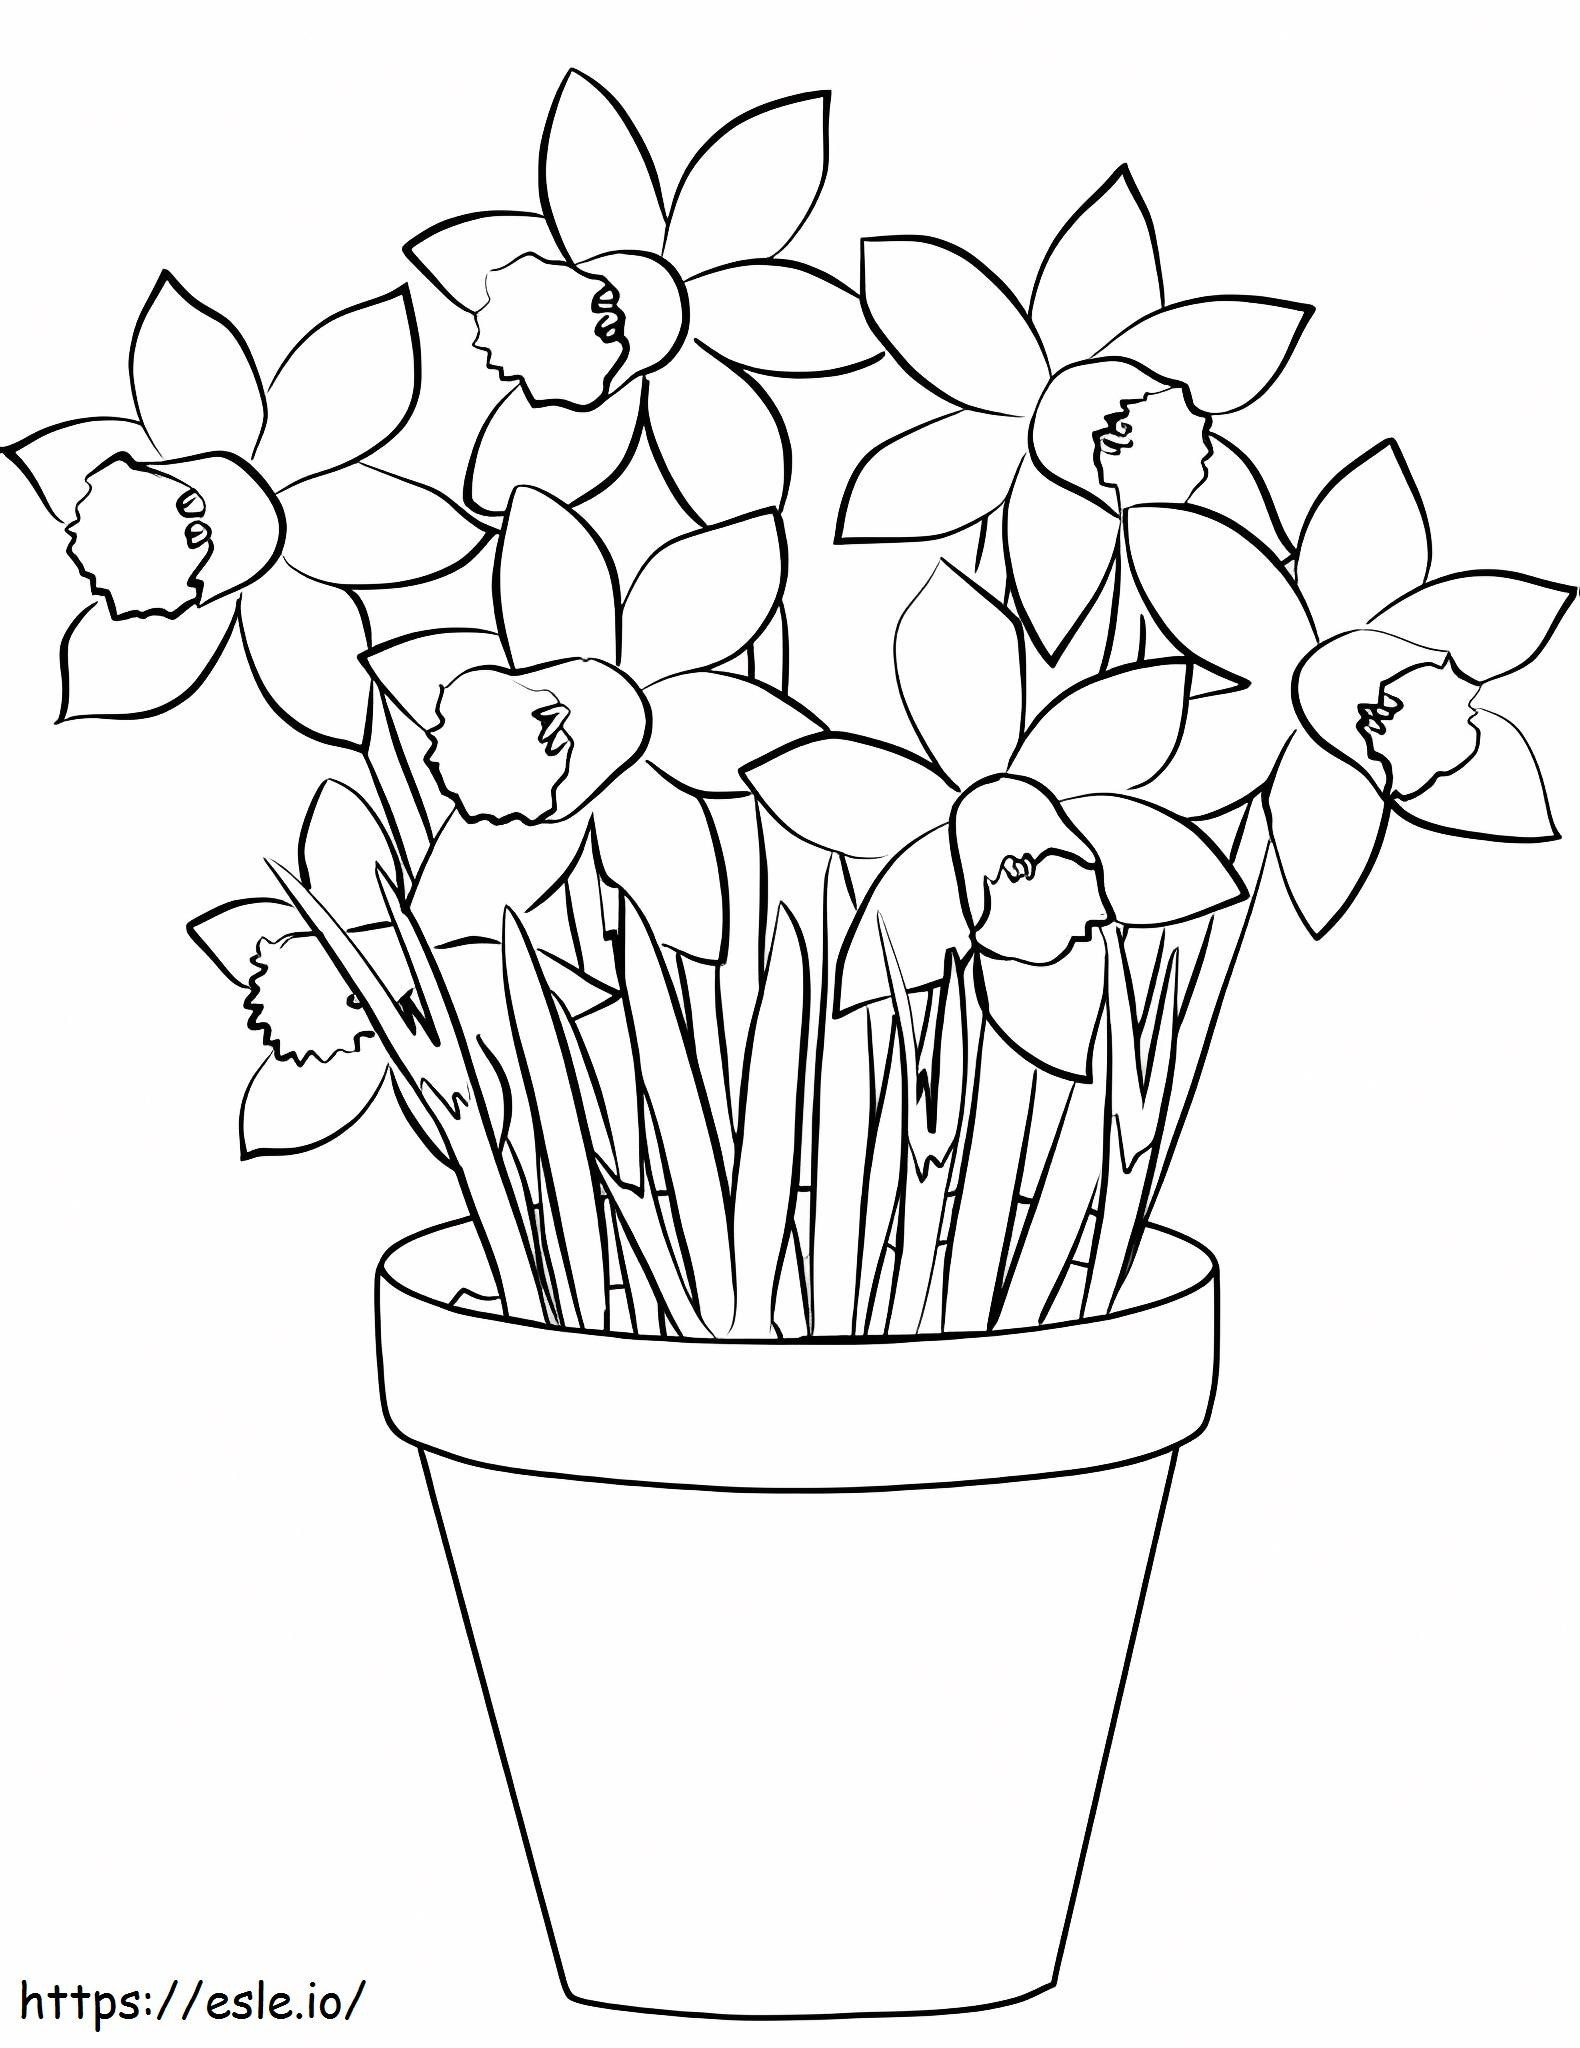 Daffodils In A Pot coloring page